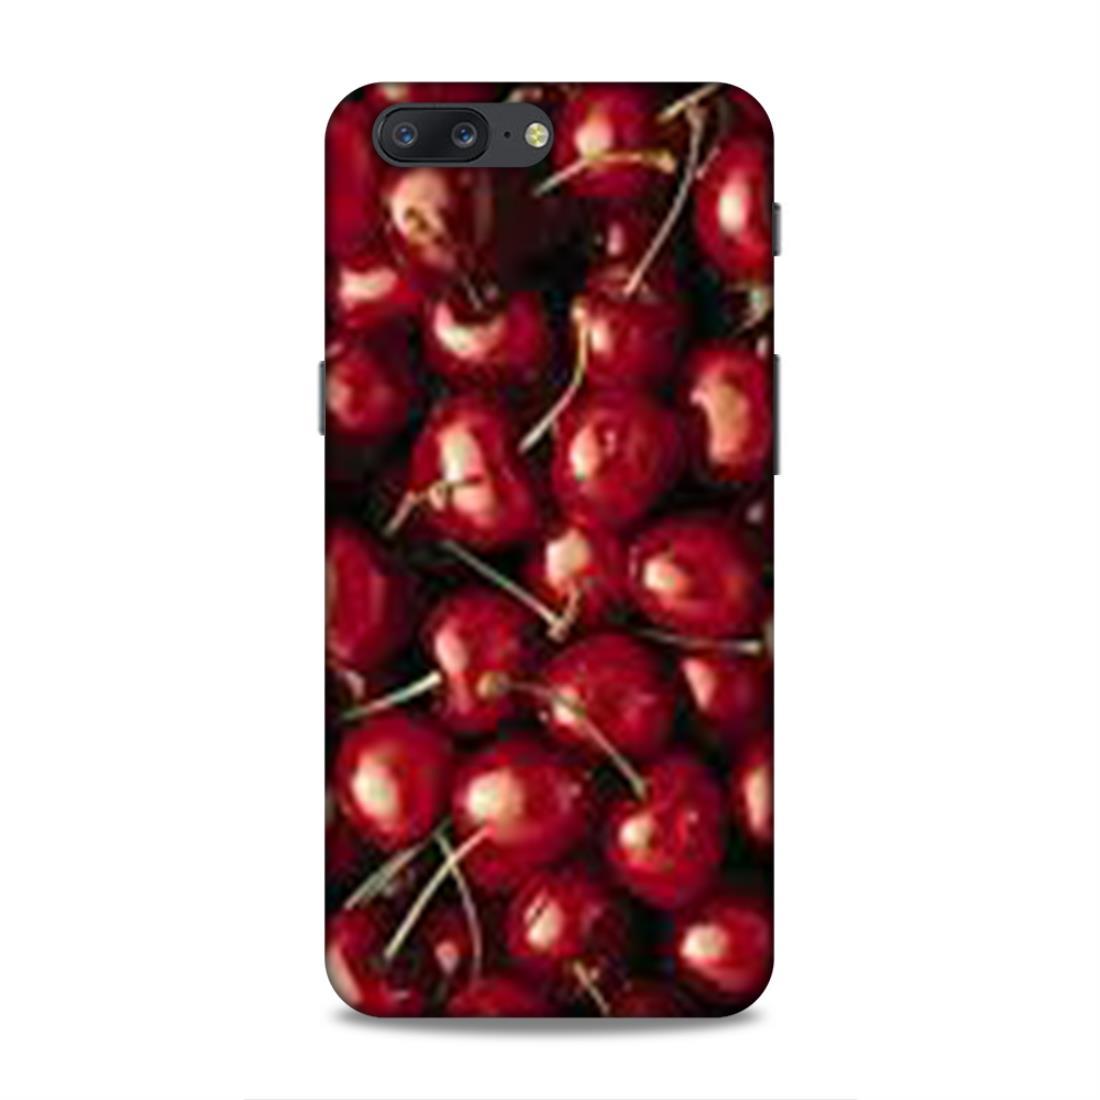 Red Cherry Love OnePlus 5 Mobile Cover Case